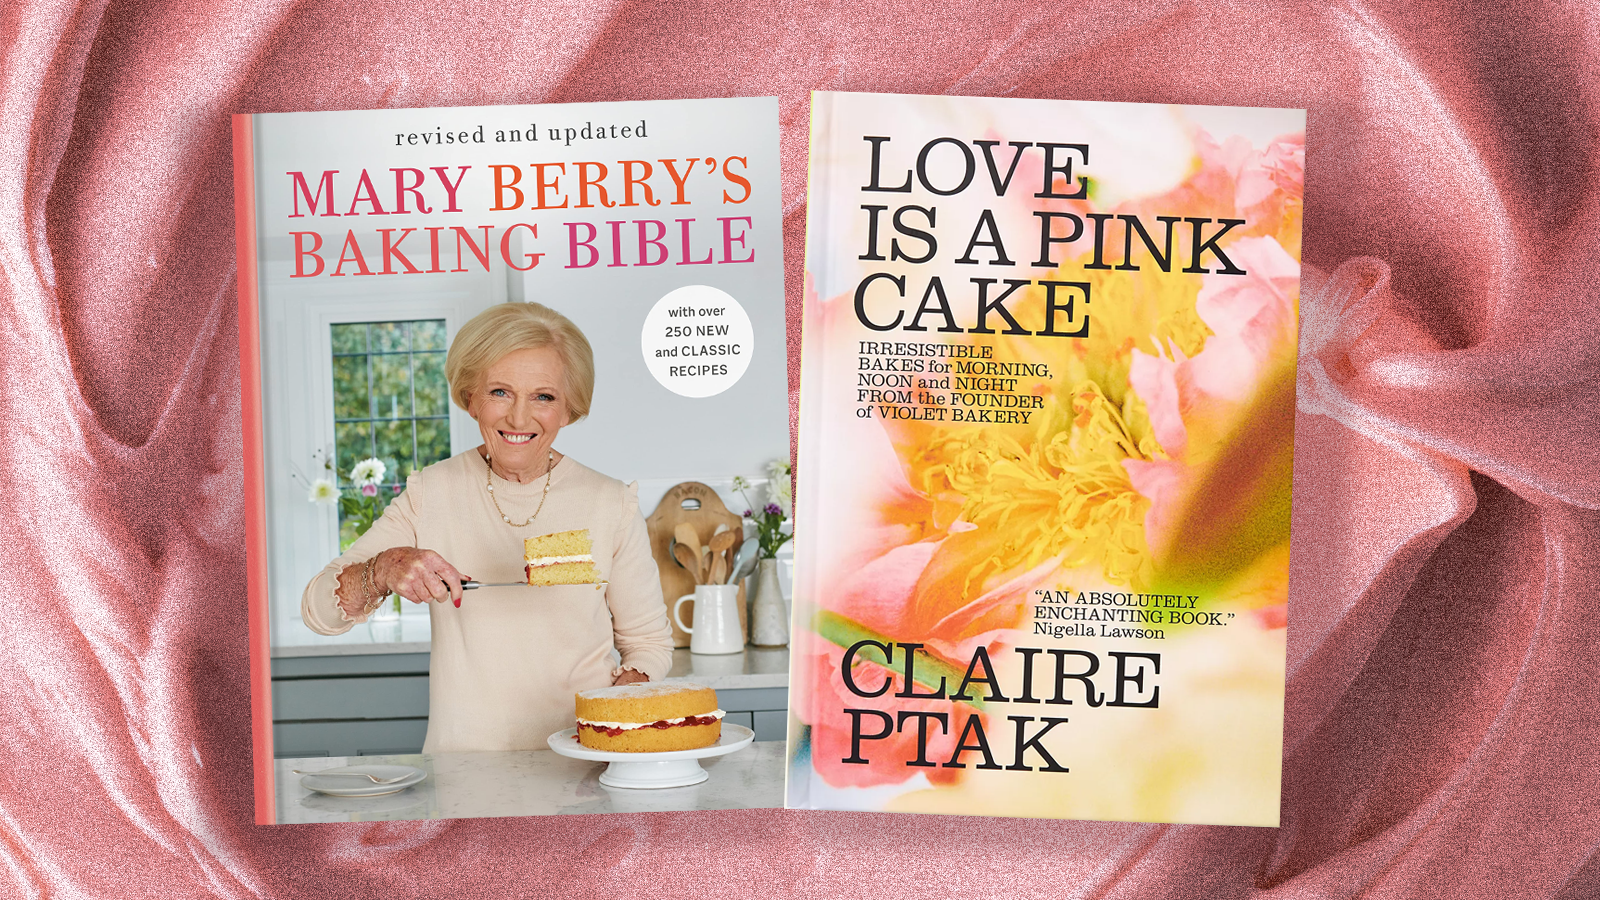 The covers of Mary Berry’s Baking Bible and Love Is a Pink Cake superimposed over a big swirl of pink frosting.